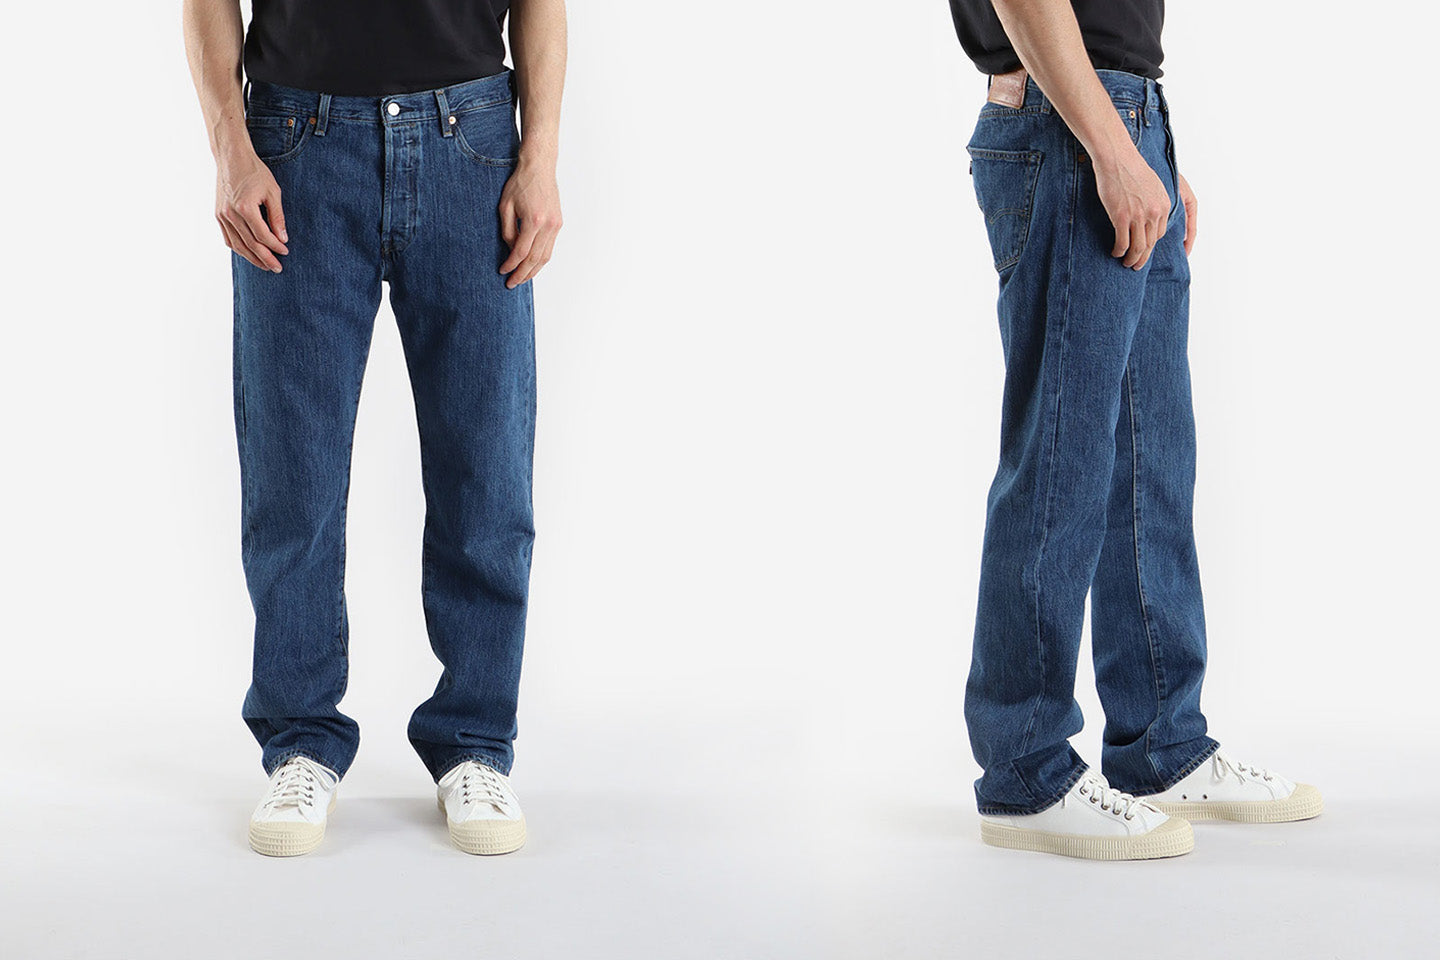 Levi’s Fit Guide | How do Levi’s Jeans Fit? – Urban Industry